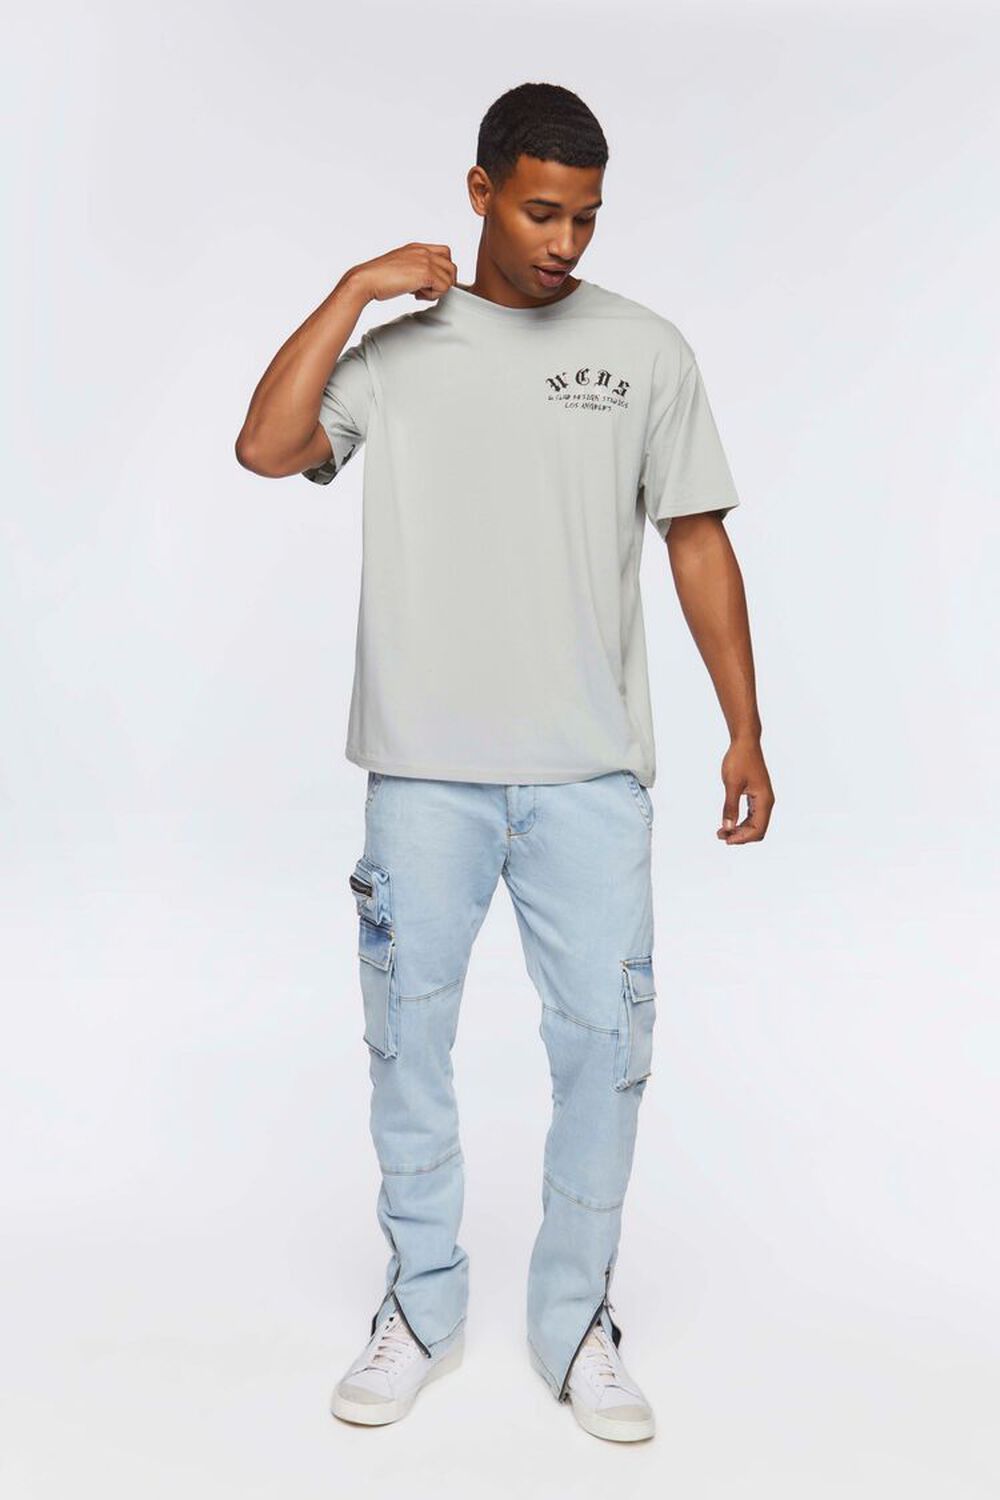 Drip WCDS Graphic Tee